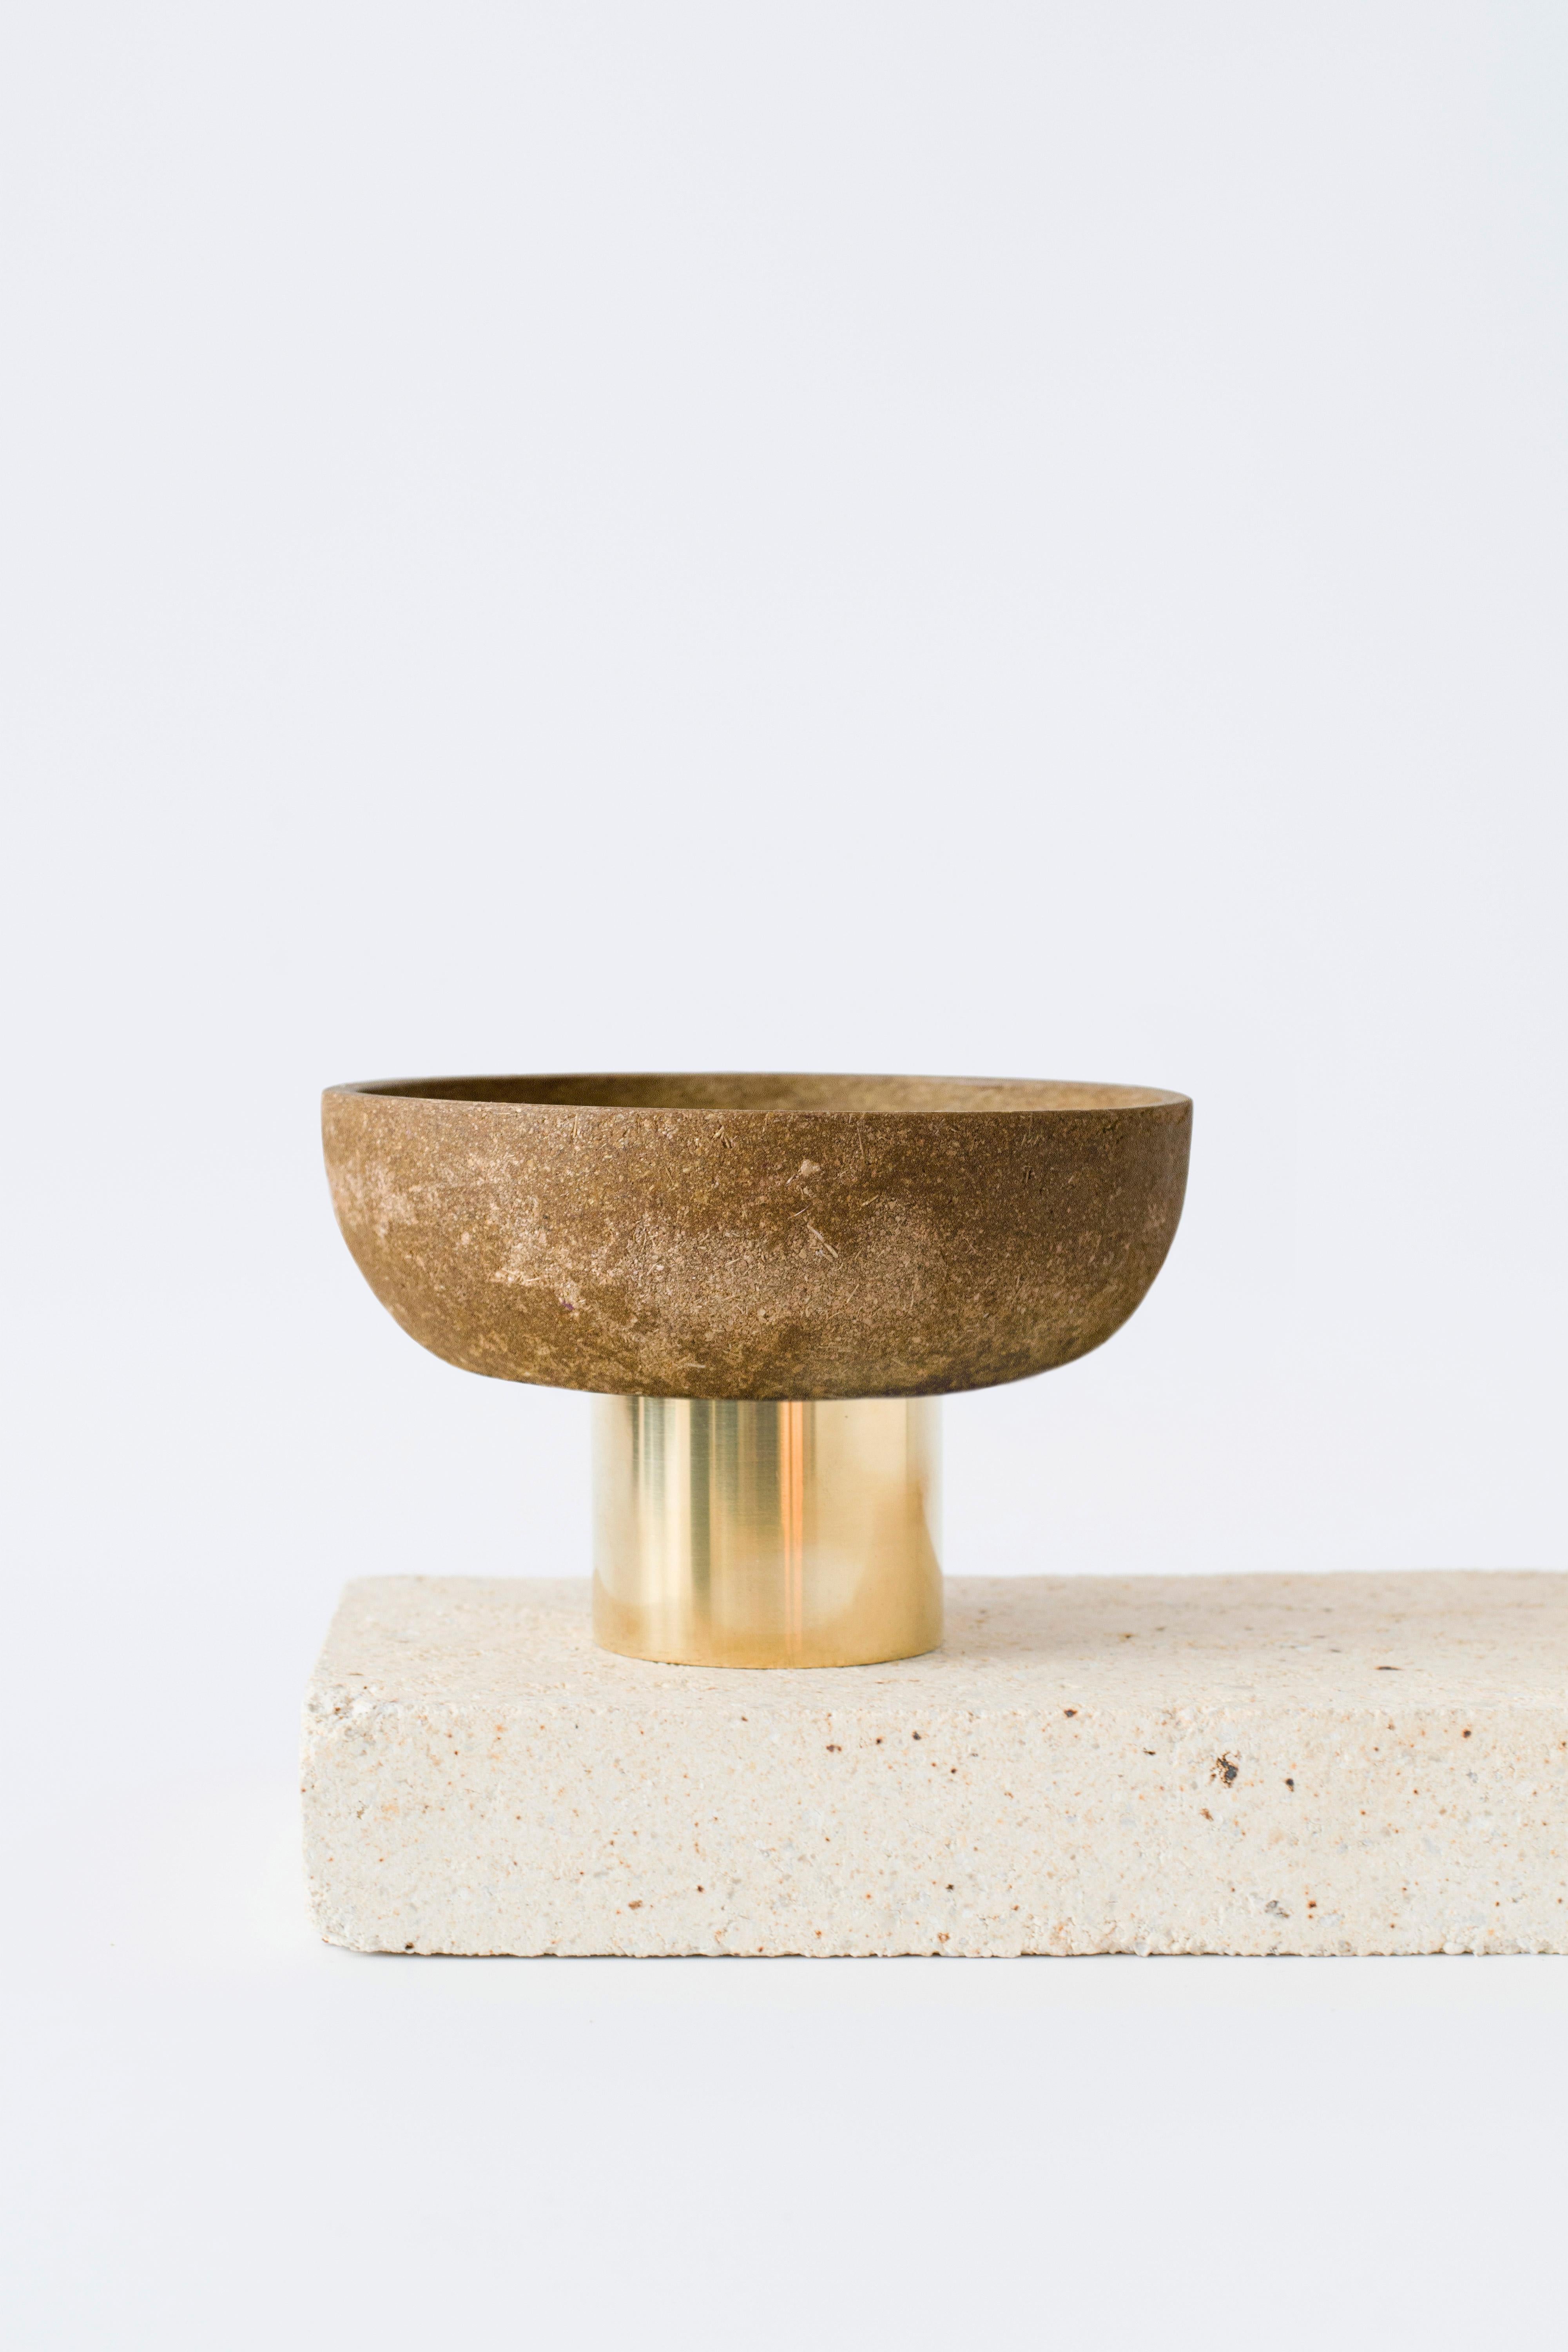 Ash candle holder by Evelina Kudabaite Studio
Handmade
Materials: ash, brass
Dimensions: H 7.5 x D 12 cm
Colour: ochre
Notes: for dry use

Since 2015, product designer Evelina Kudabaite keeps on developing and making GIRIA objects. Designer